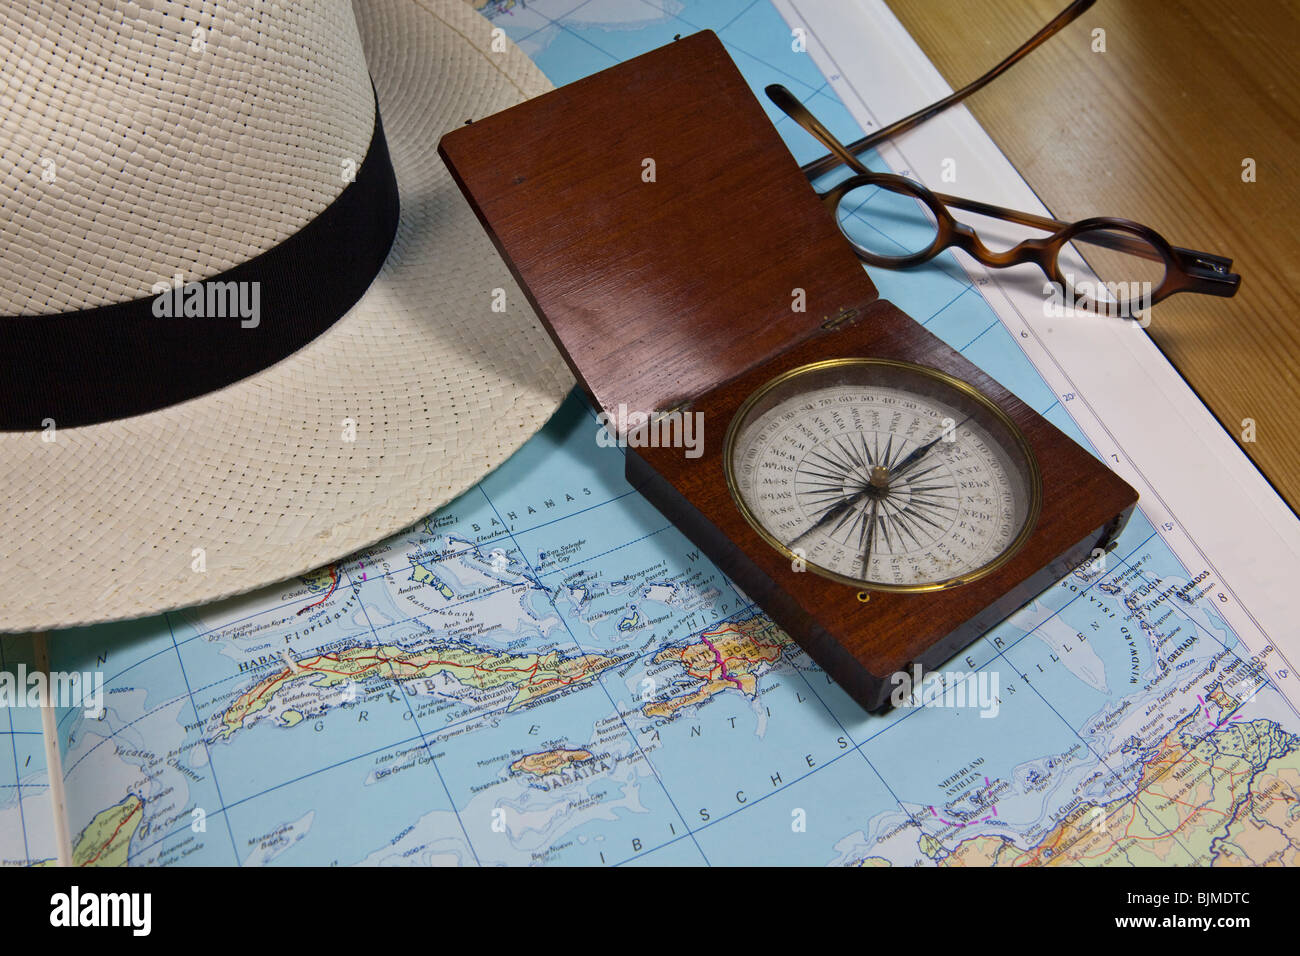 Planning a trip to the Caribbean, Cuba, historical compass and reading glasses Stock Photo